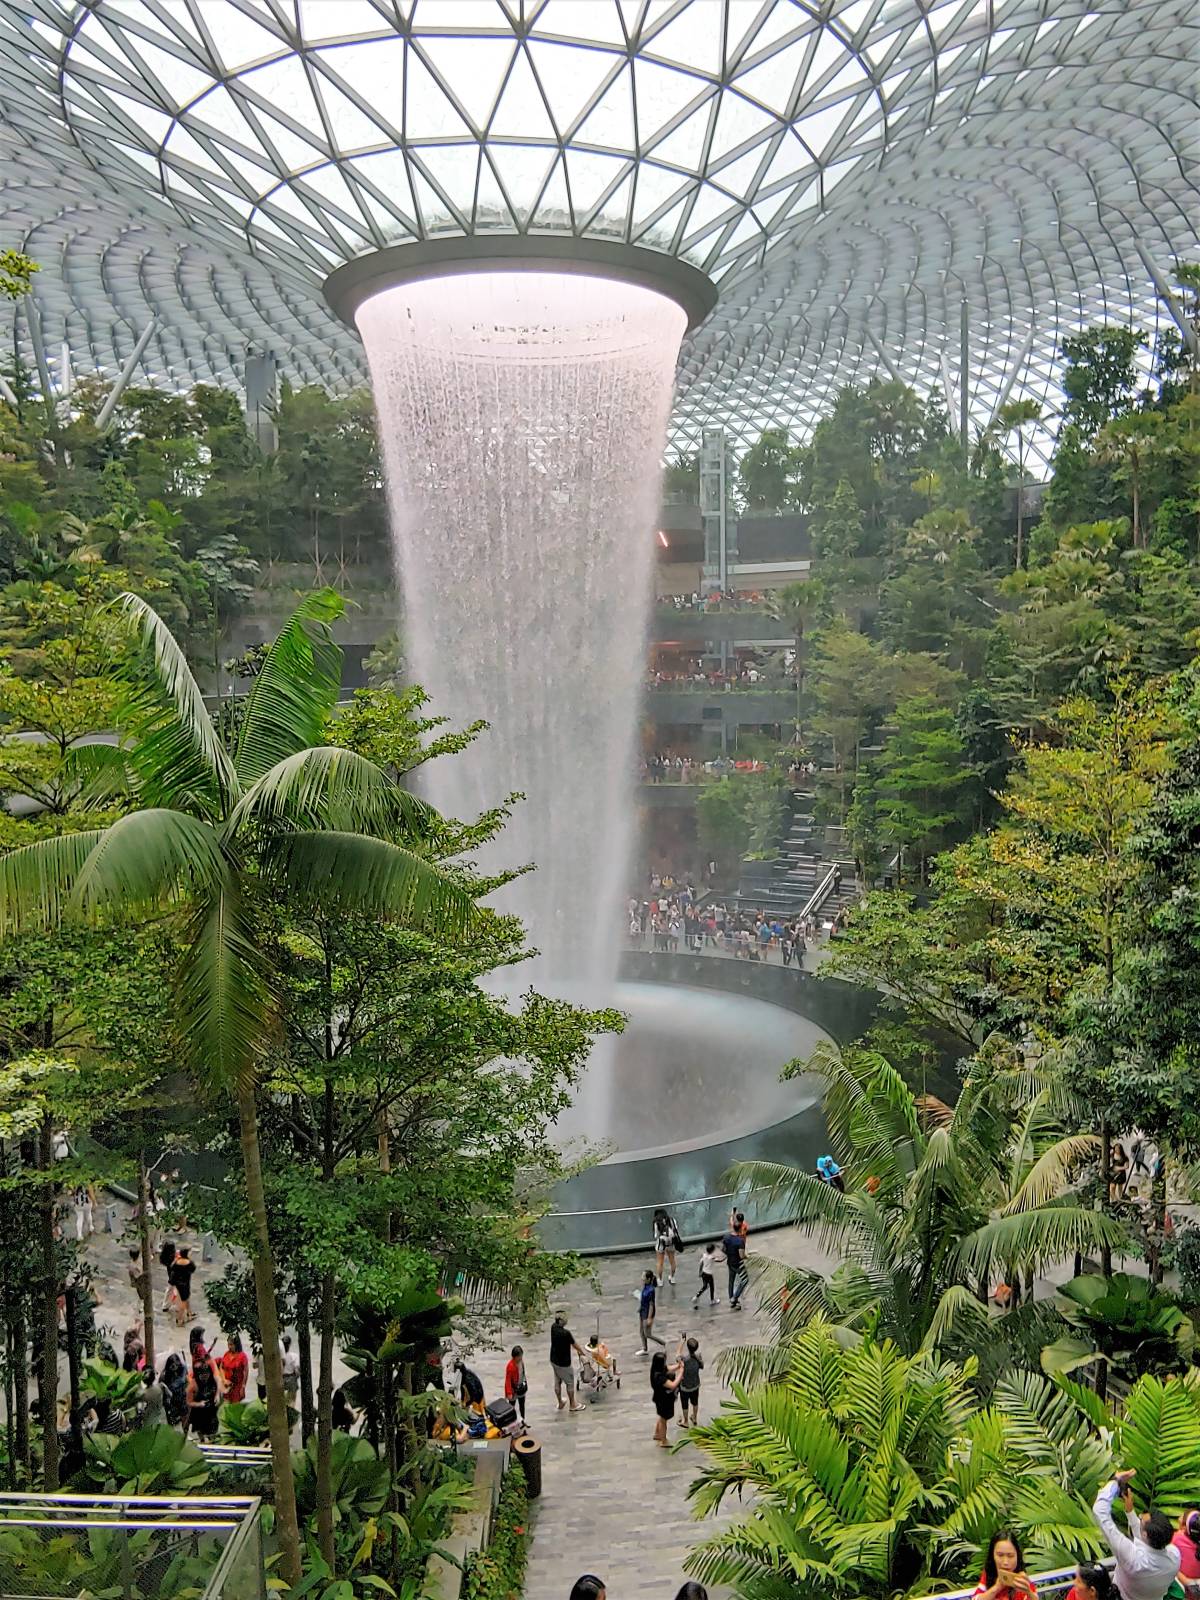 SINGAPOREANS FLOCK TO JEWEL CHANGI AIRPORT ON ITS OPENING WEEKEND